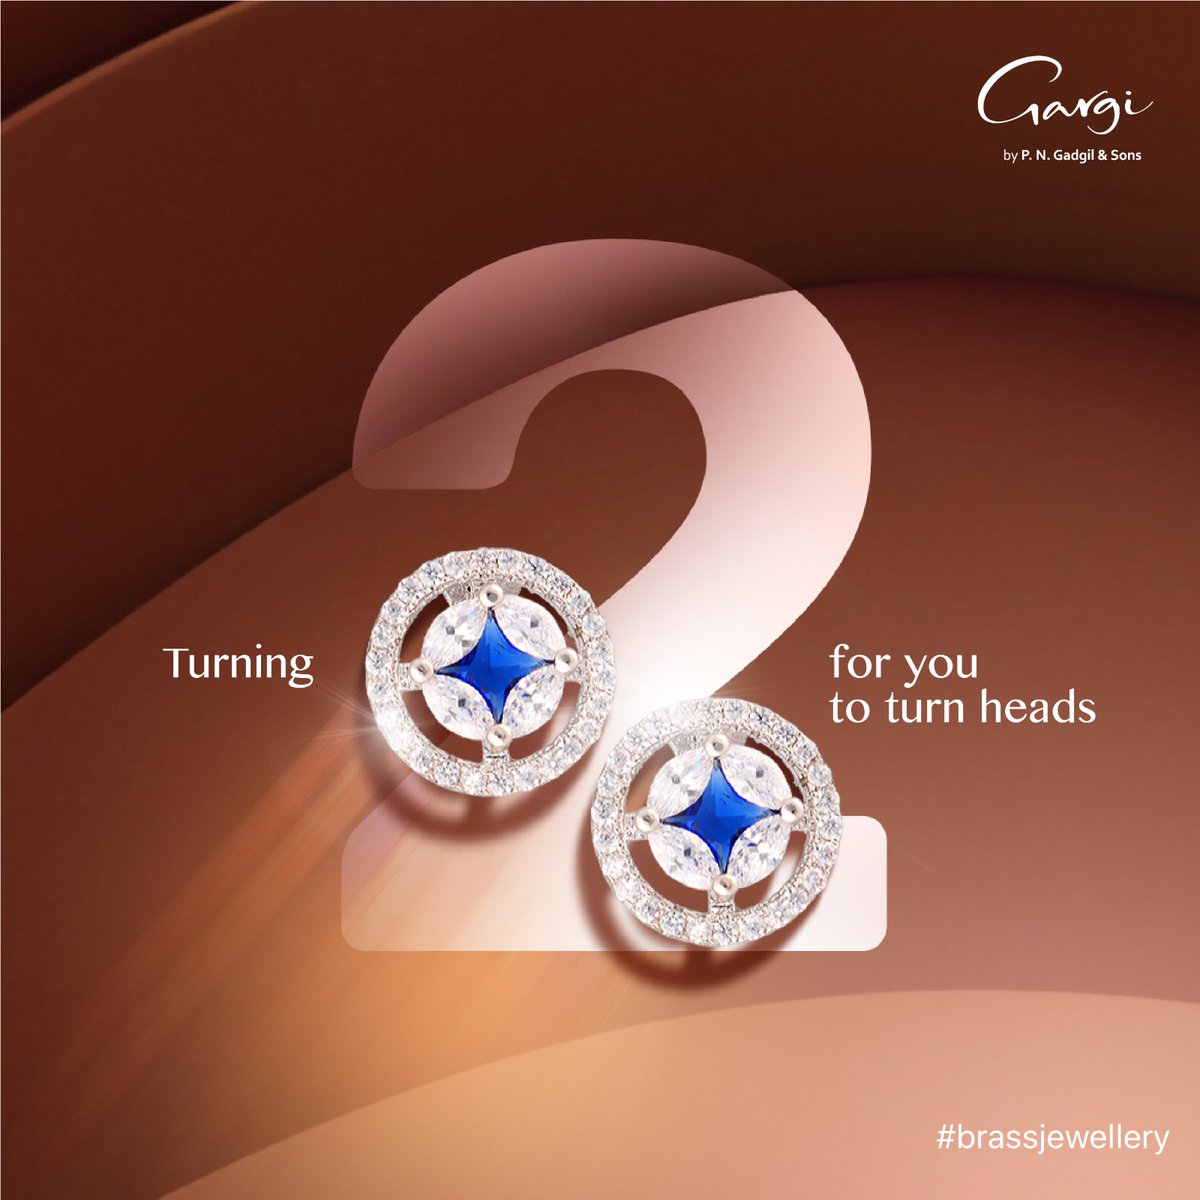 Double the style, double the grace – as we turn 2, get ready to turn heads! Celebrate with us and enjoy a fabulous Flat 25% off on Gargi Jewellery. 

#GargiTurns2 #anniversary #offers #discounts #brass #brassjewellery